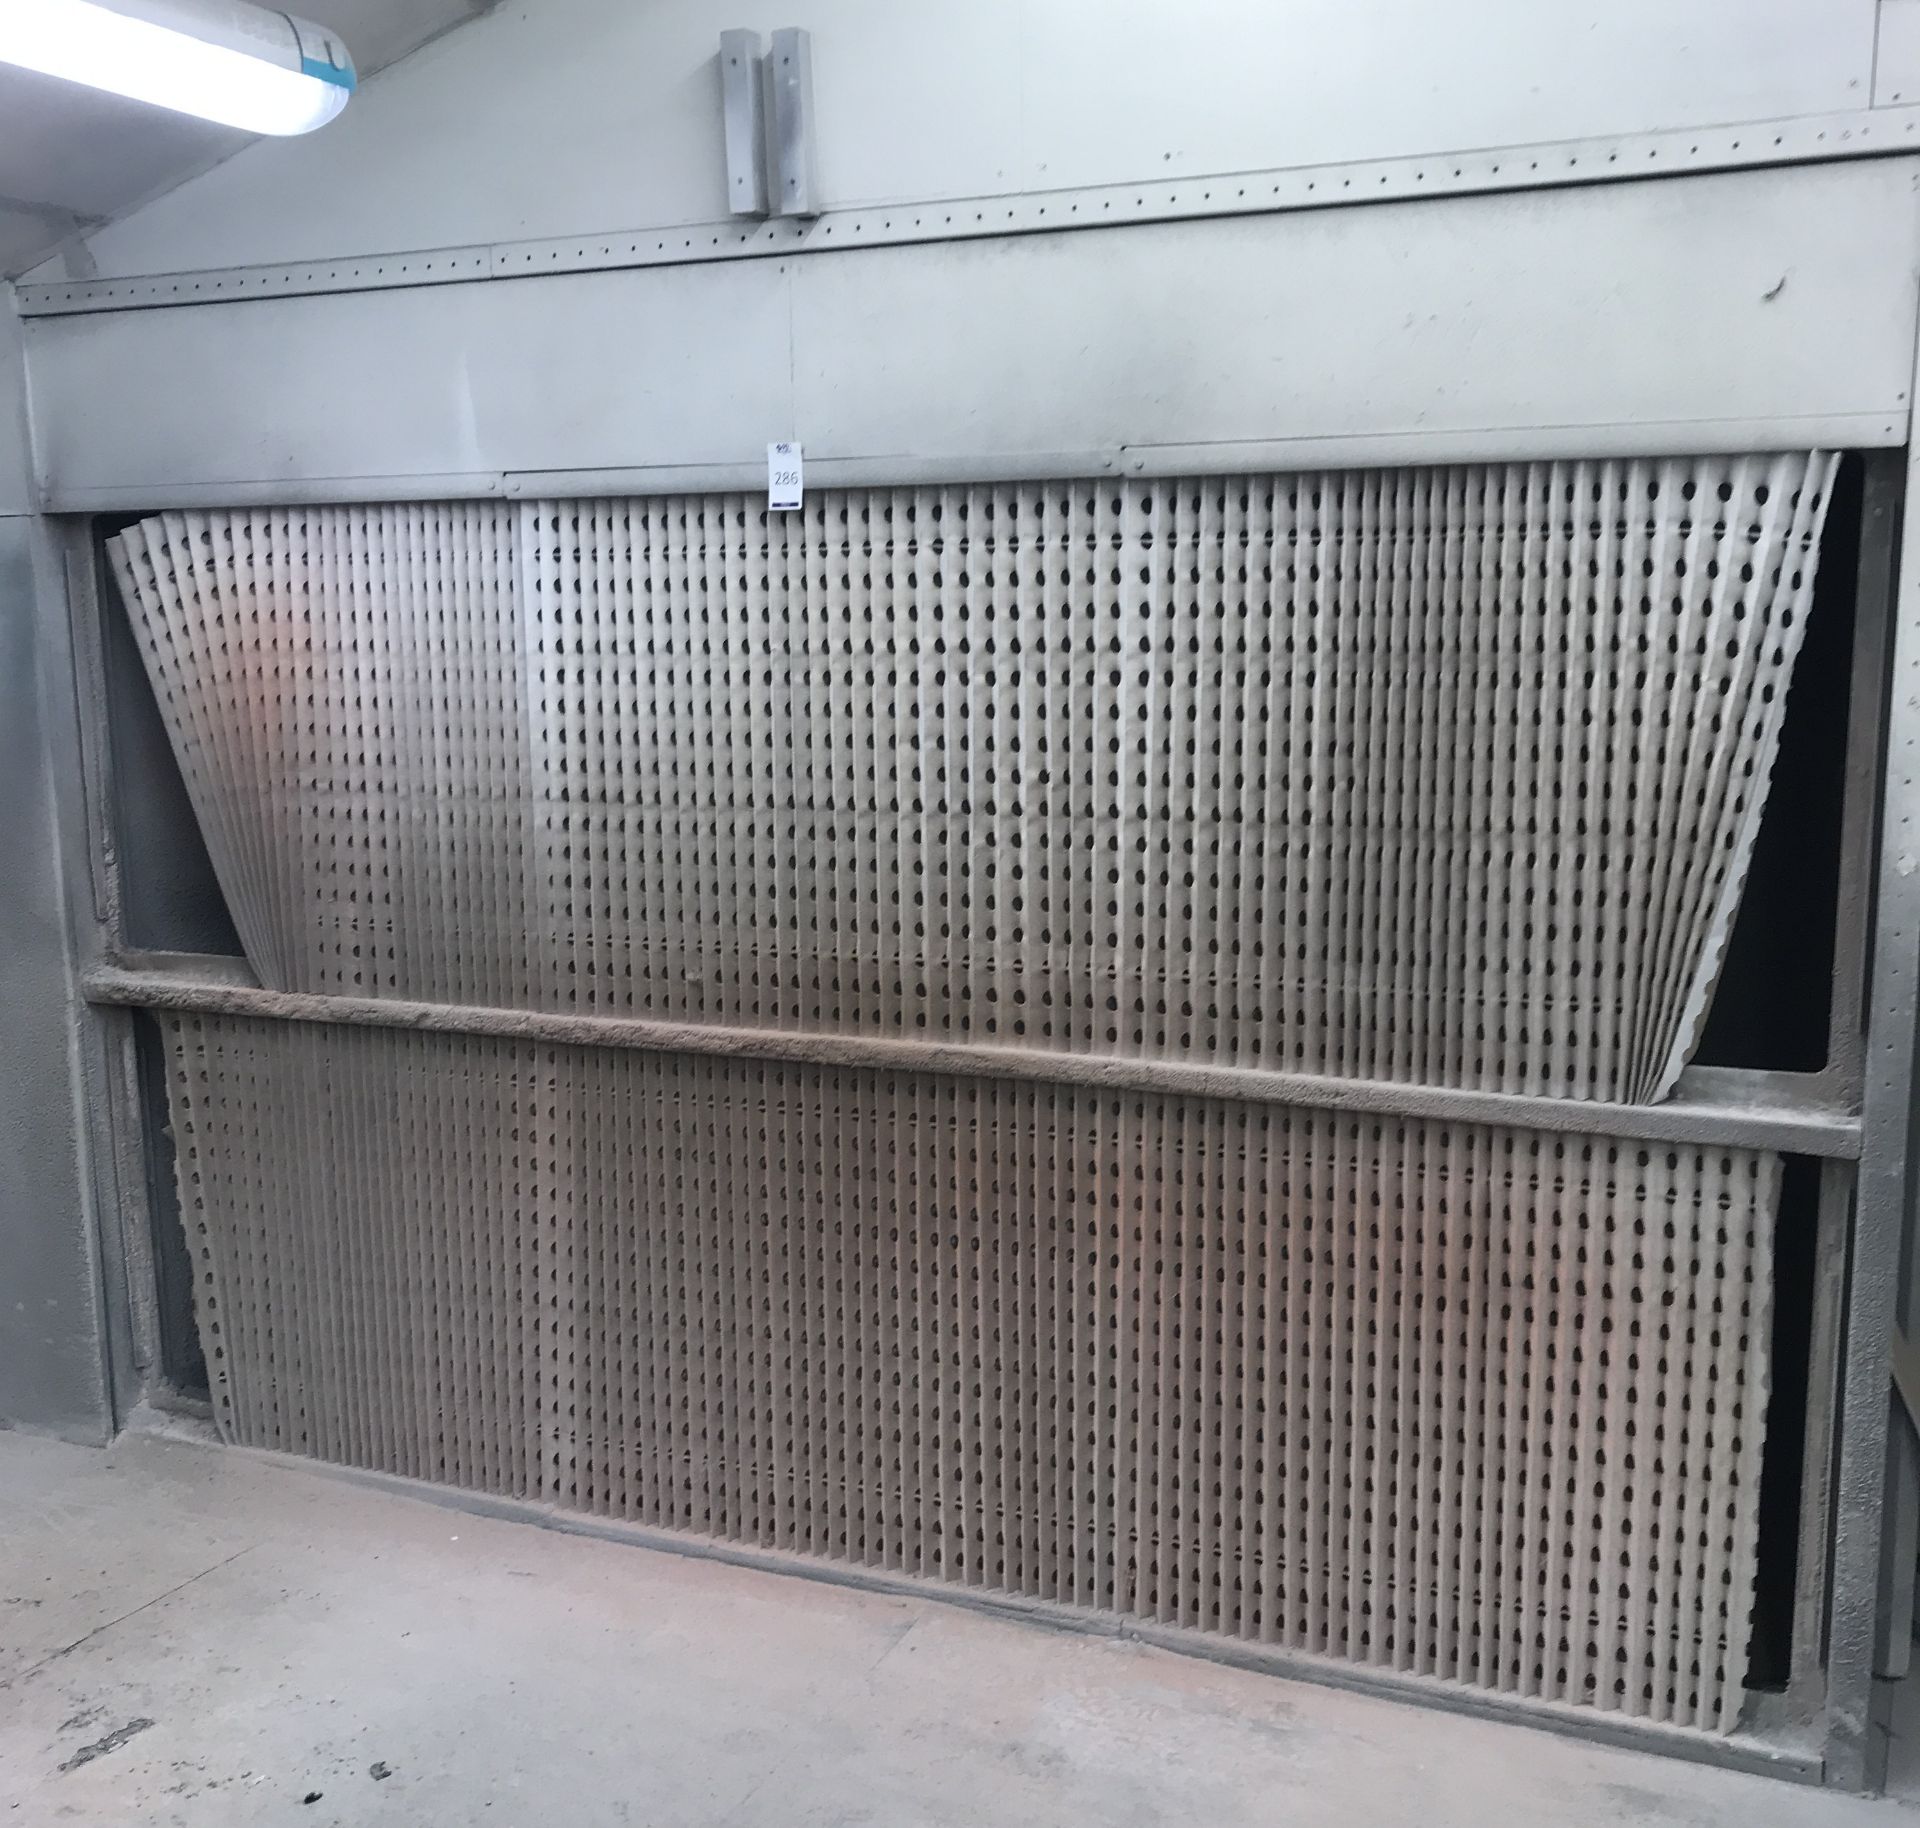 Twin Fercell Sectional Dryback Spray Booths (Purchaser to Dismantle - Must Provide RAMS, Copy of - Image 2 of 4